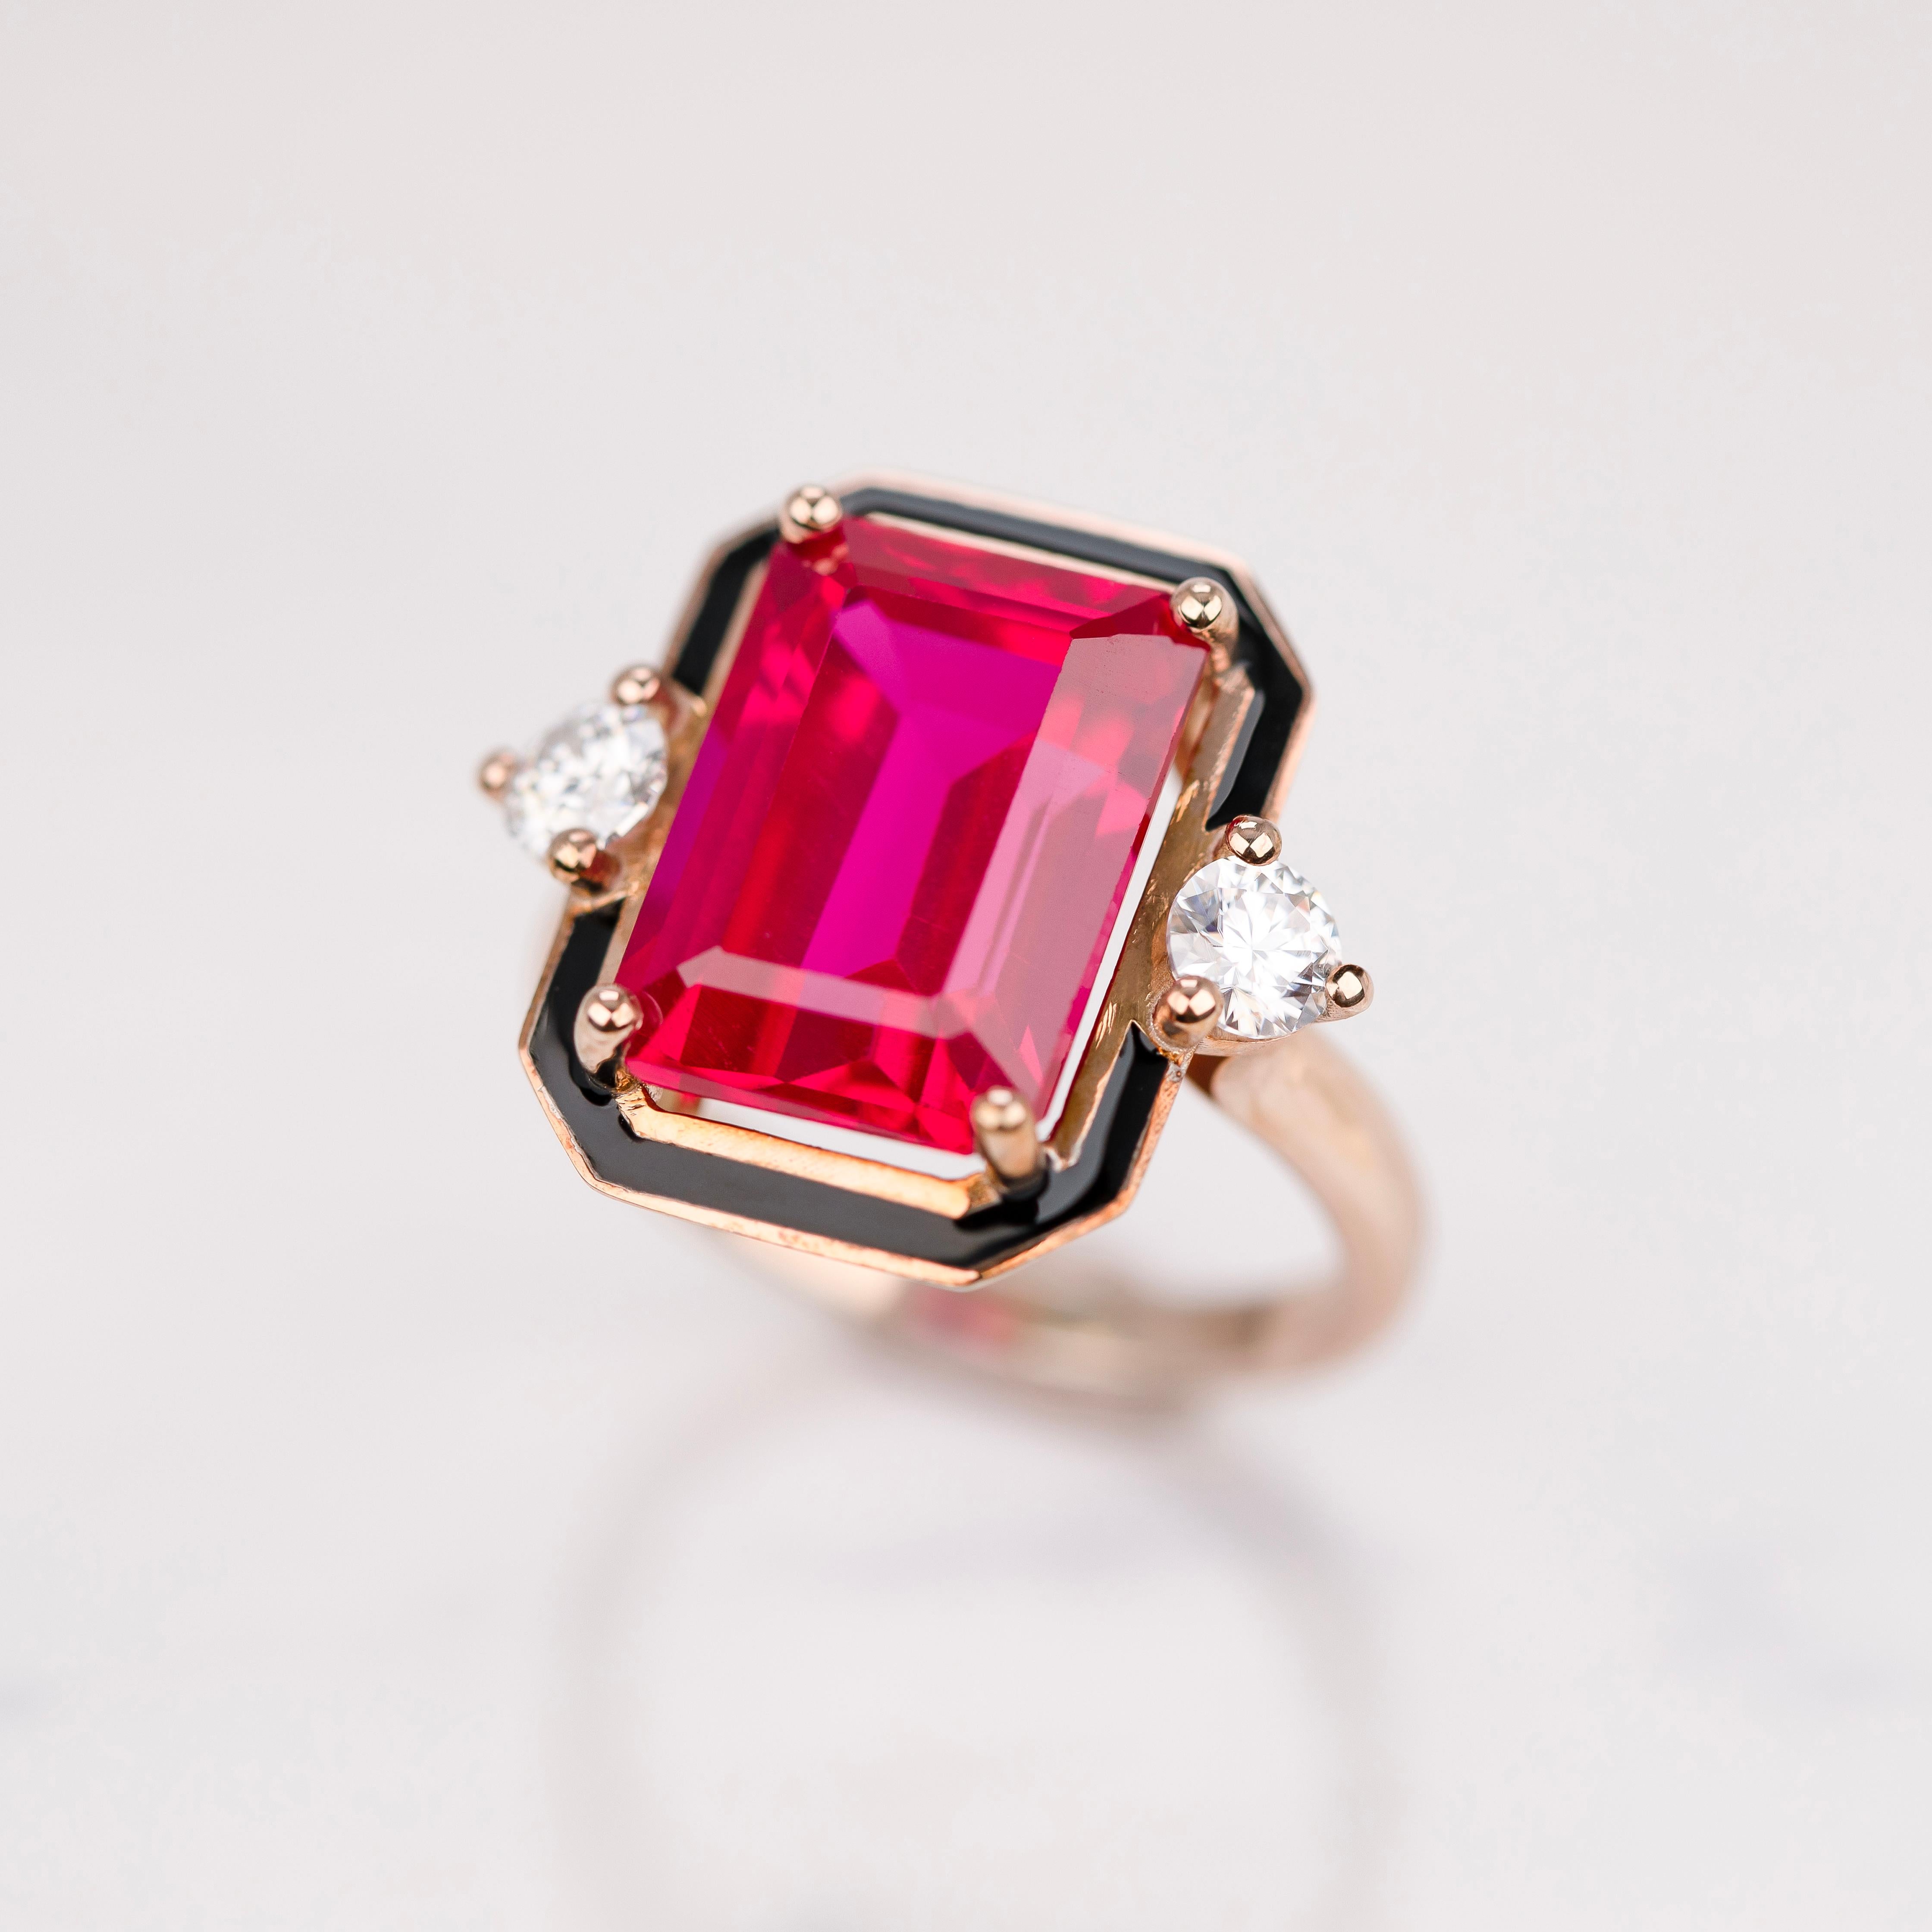 Emerald Cut Art Deco Style Ring, Synthetic Ruby and Moissanite Stone Ring, 14K Gold Ring For Sale